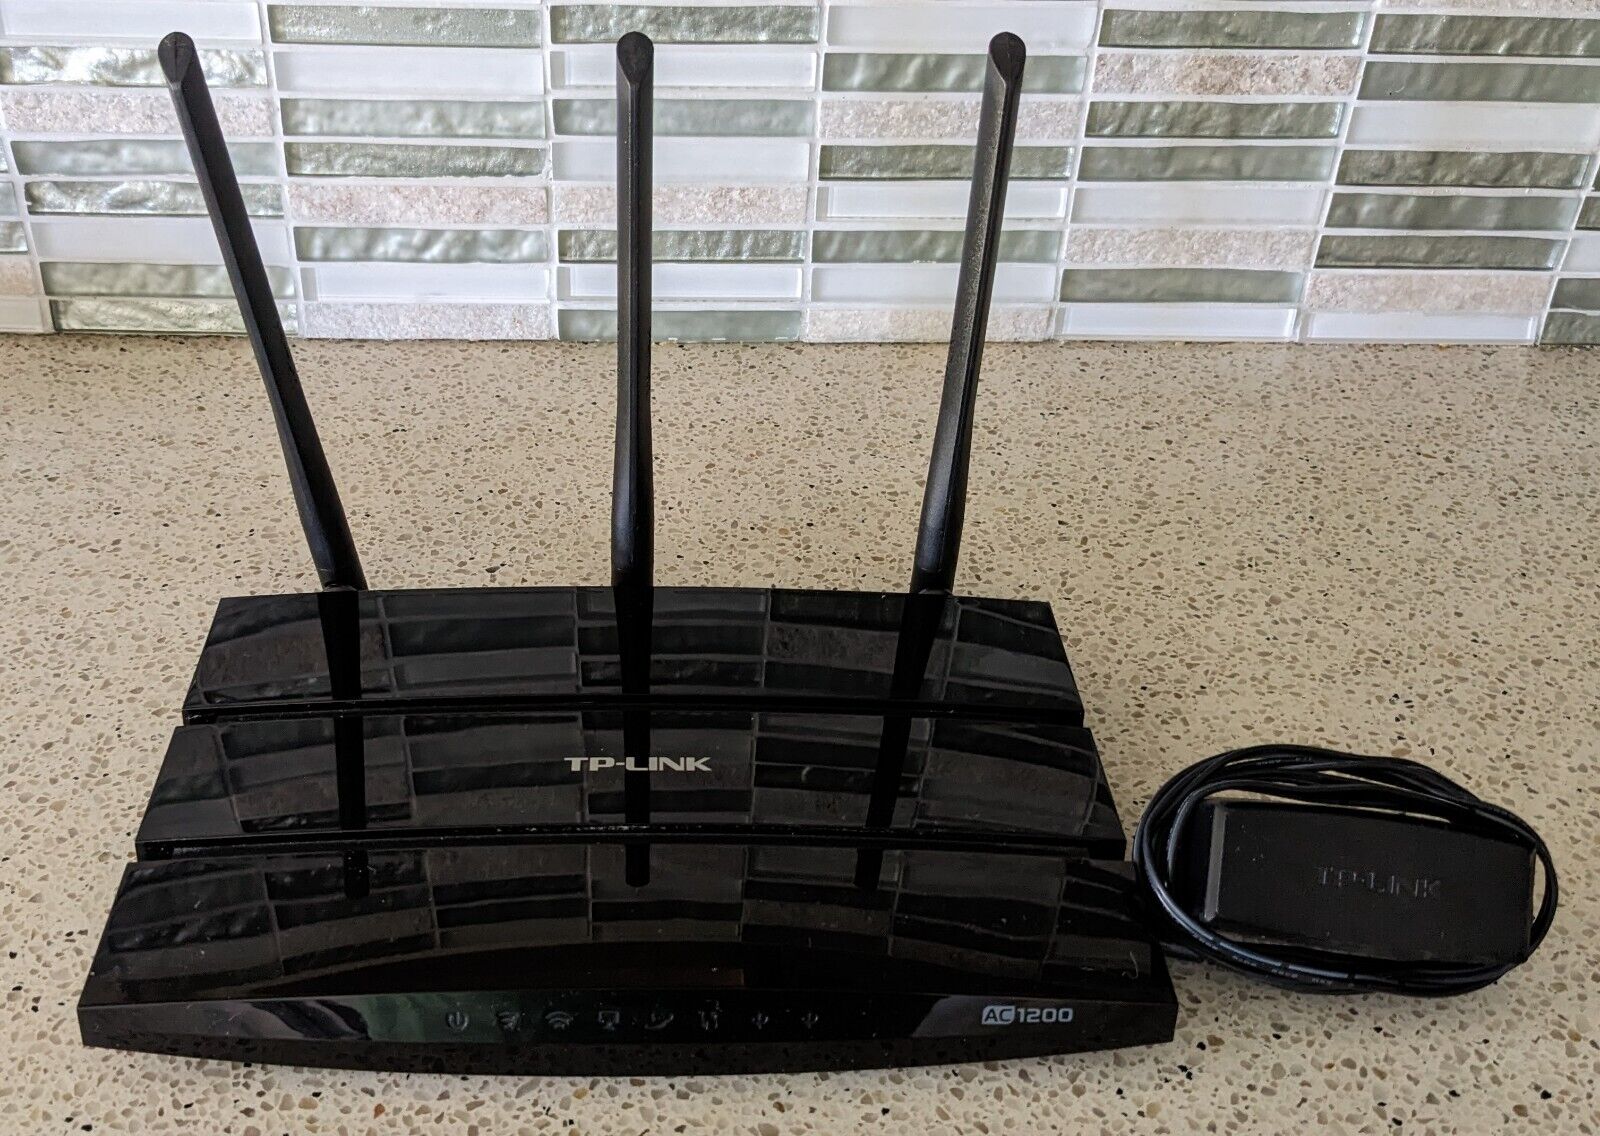 TP-LINK ARCHER C1200 1200 Mbps 4 Port 5GHZ Dual Band Wireless Router